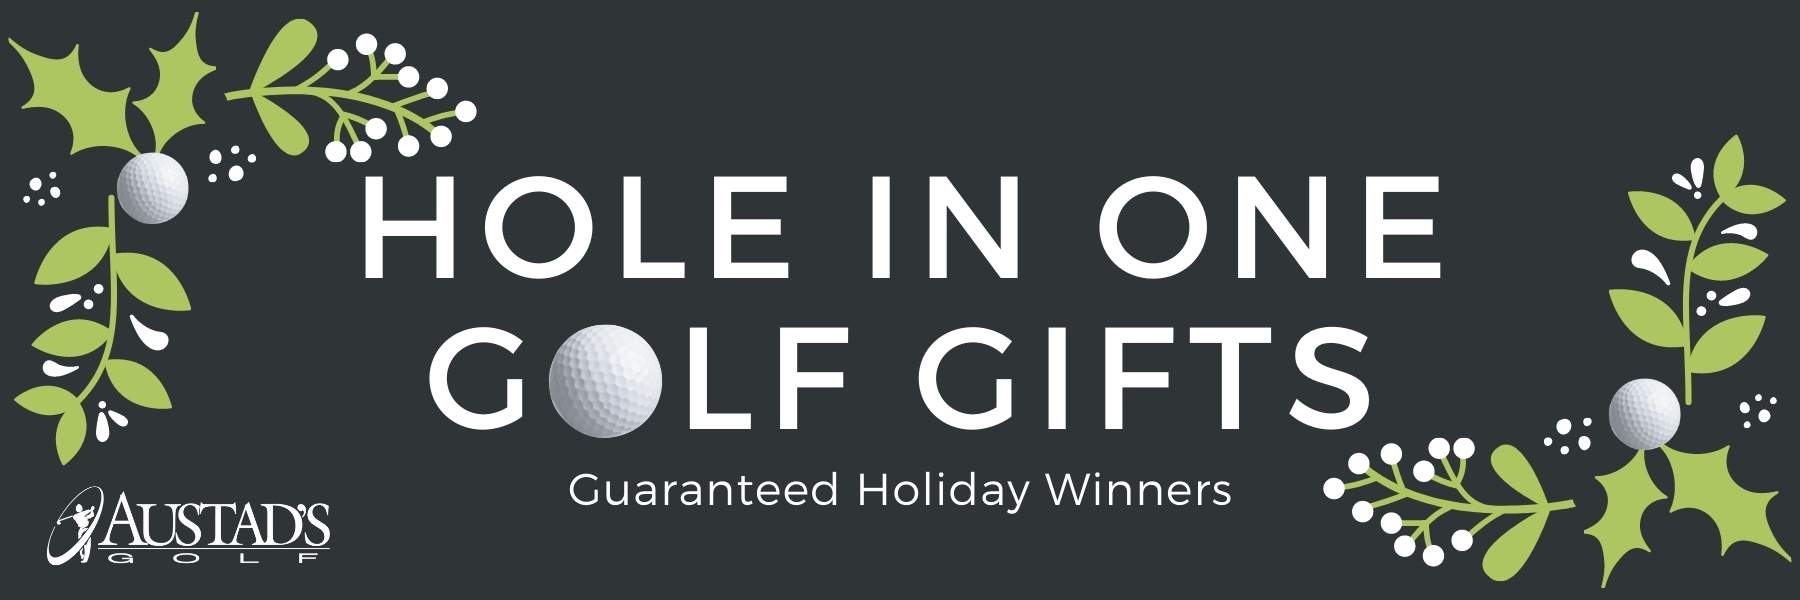 Guaranteed Hole In One Gifts